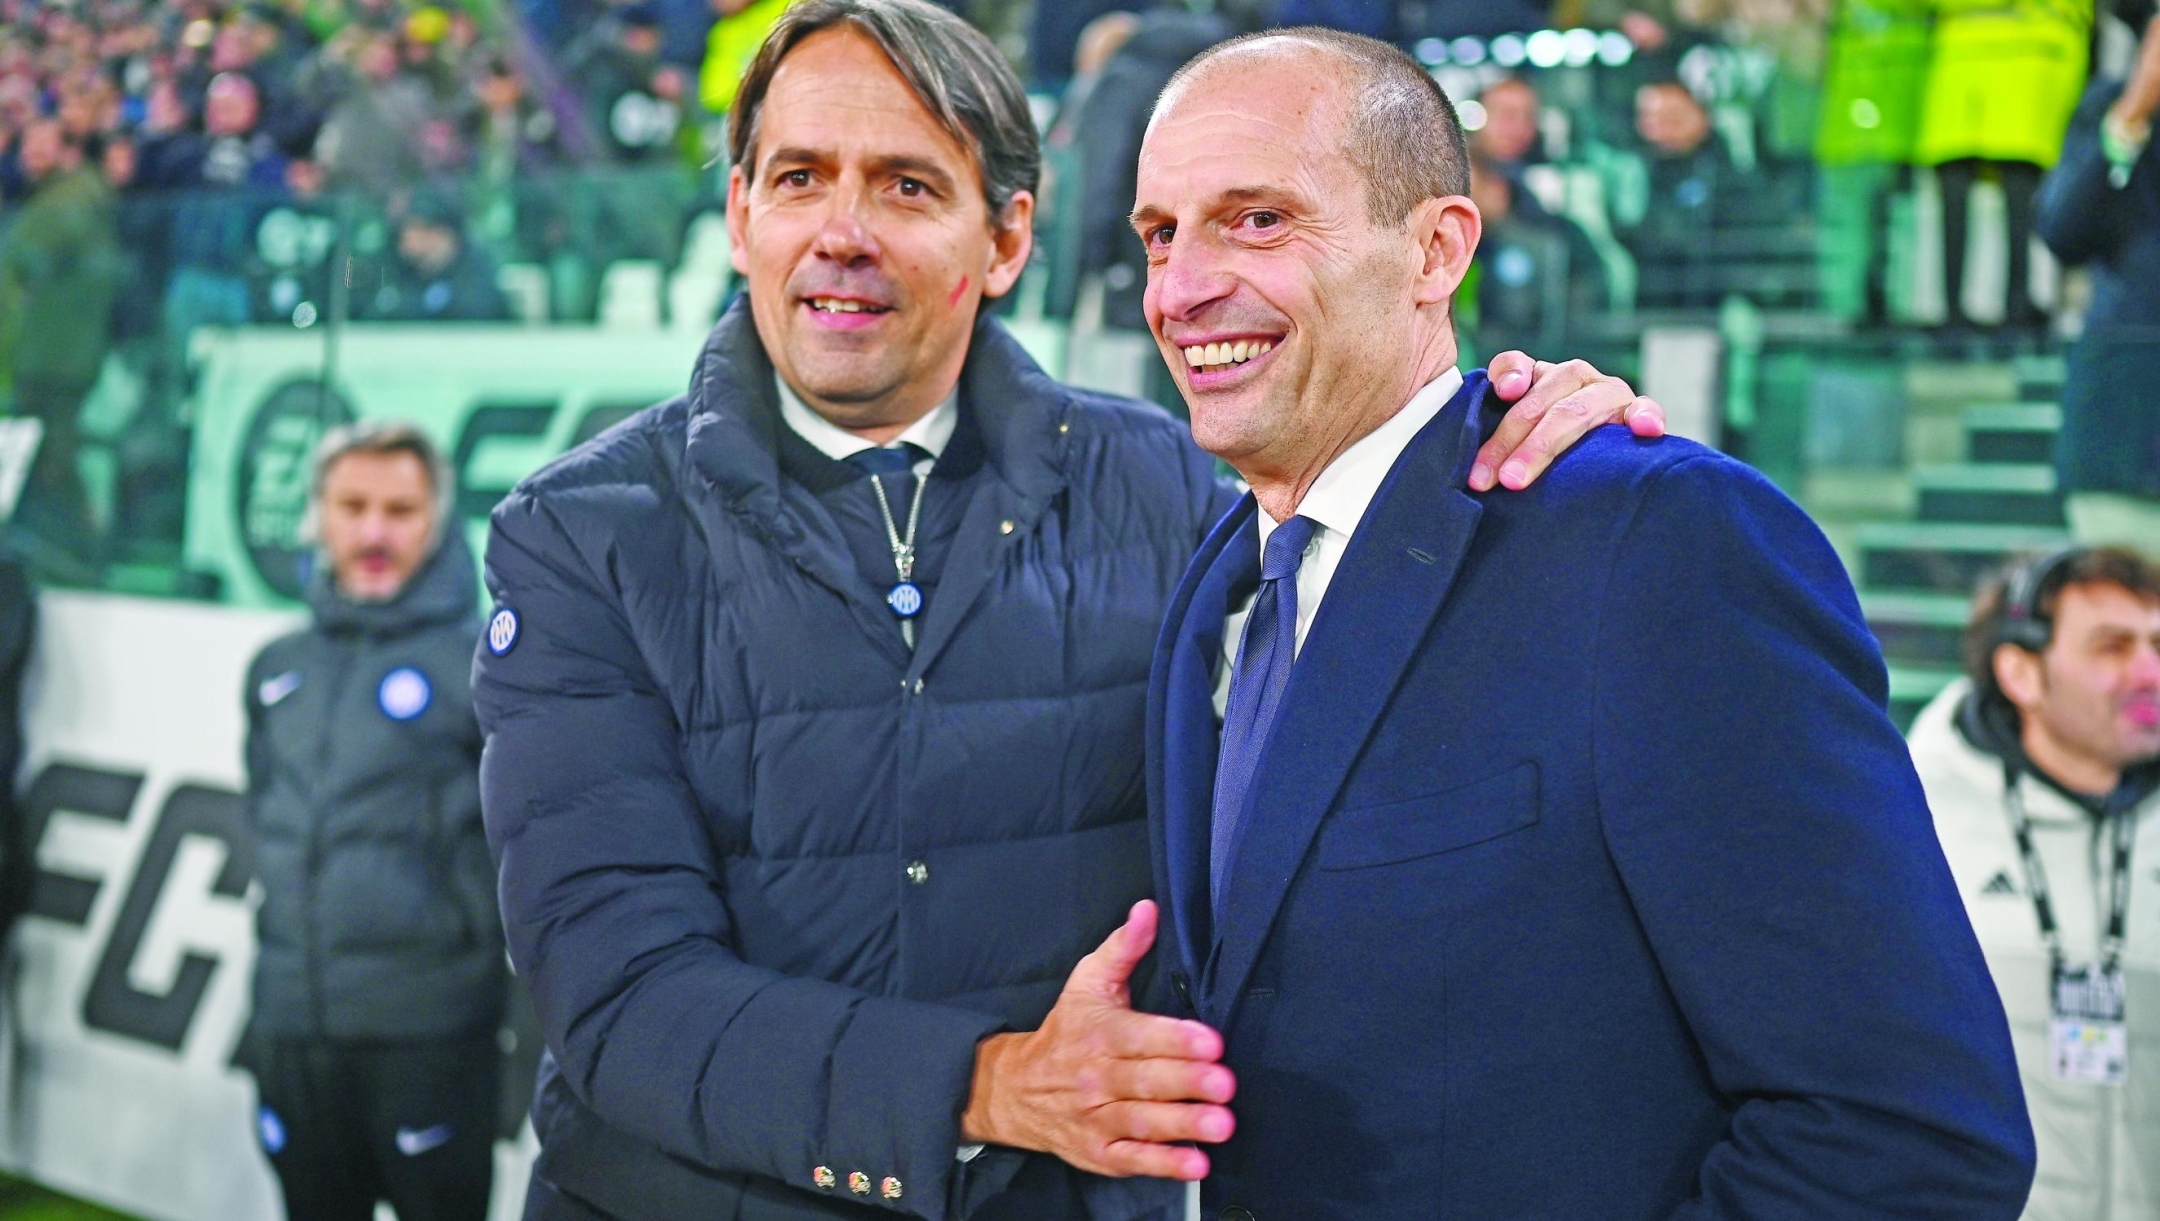 TURIN, ITALY - NOVEMBER 26:  (L-R) Head coach of FC Internazionale, Simone Inzaghi shakes hands with head coach of Juventus, Massimiliano Allegri before the Serie A TIM match between Juventus and FC Internazionale at  on November 26, 2023 in Turin, Italy. (Photo by Mattia Ozbot - Inter/Inter via Getty Images)